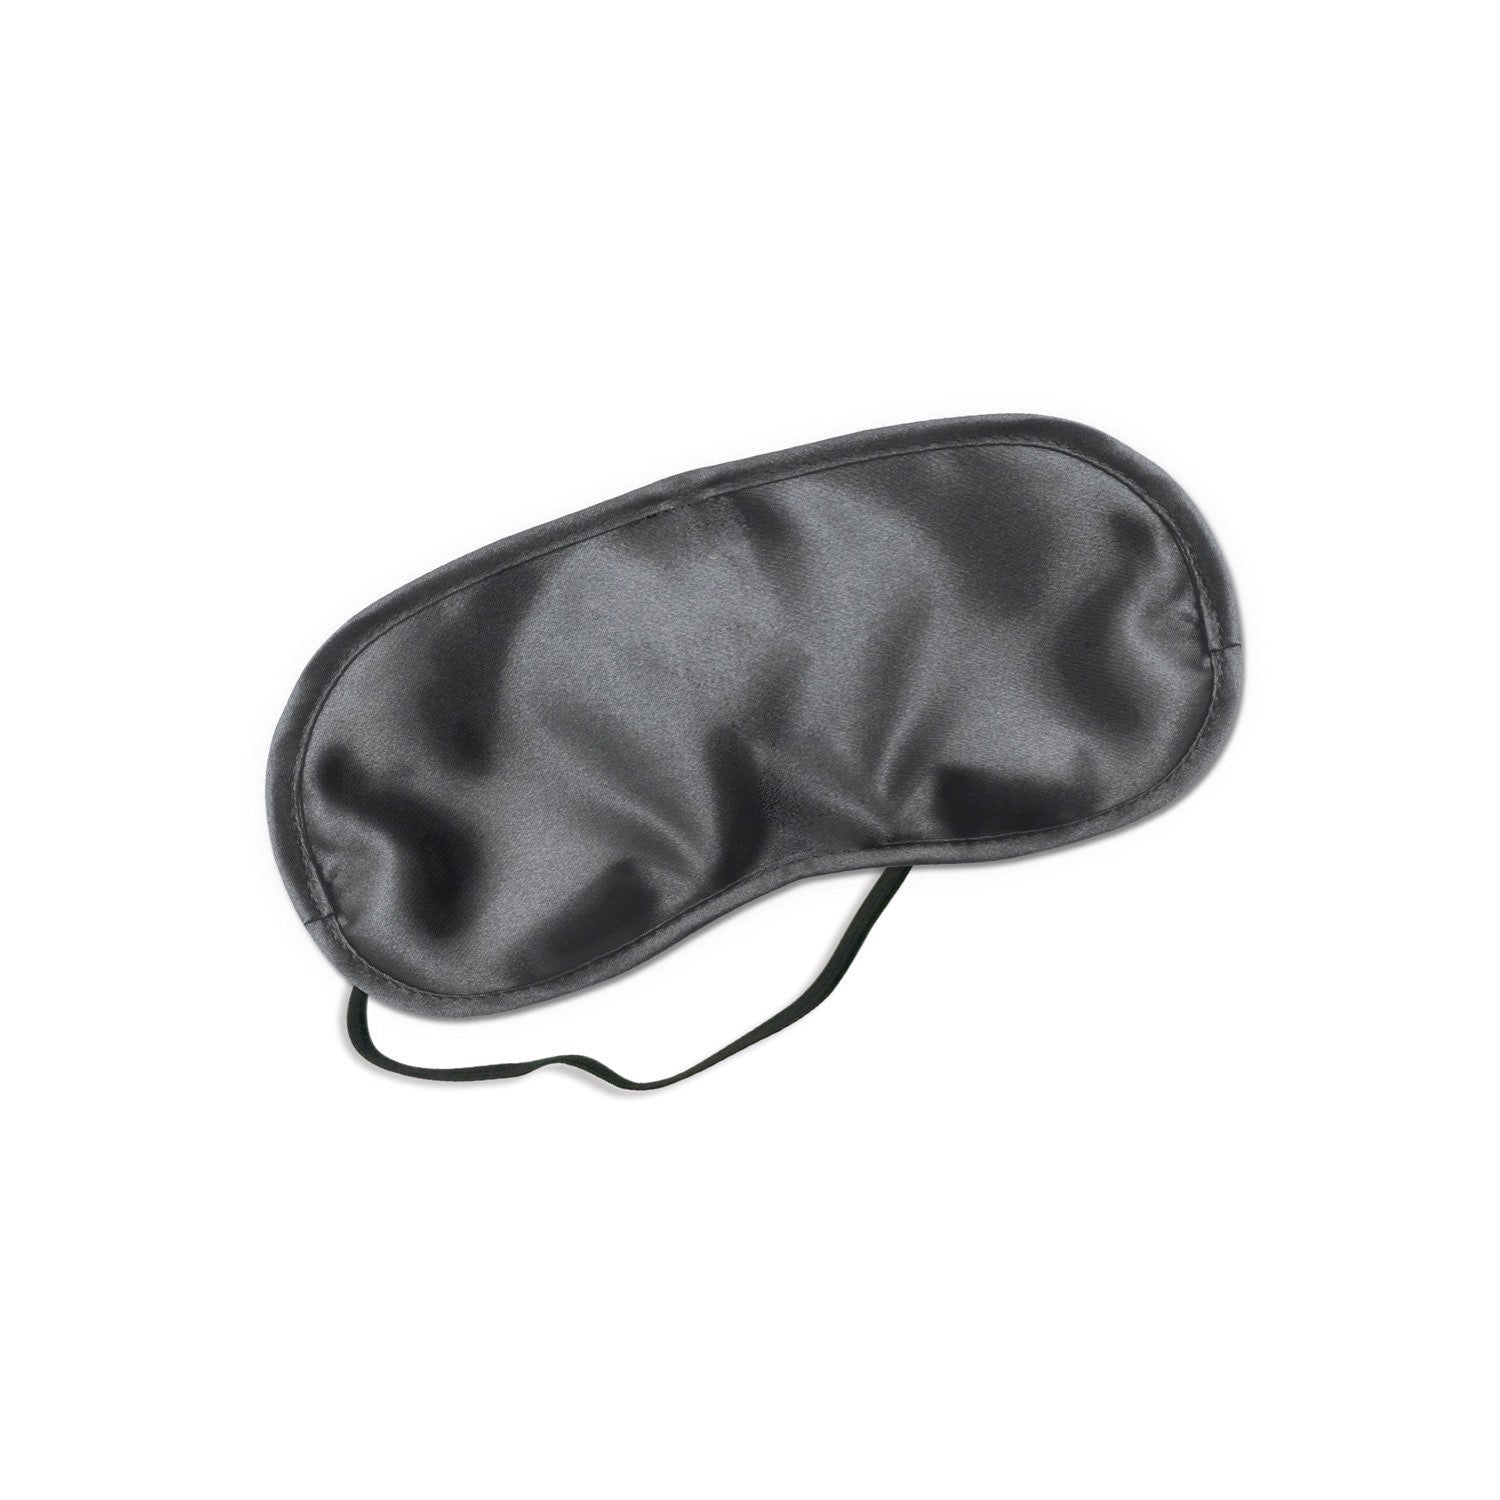 Fetish Fantasy Series Limited Edition Satin Love Mask - Black Eye Mask by Pipedream